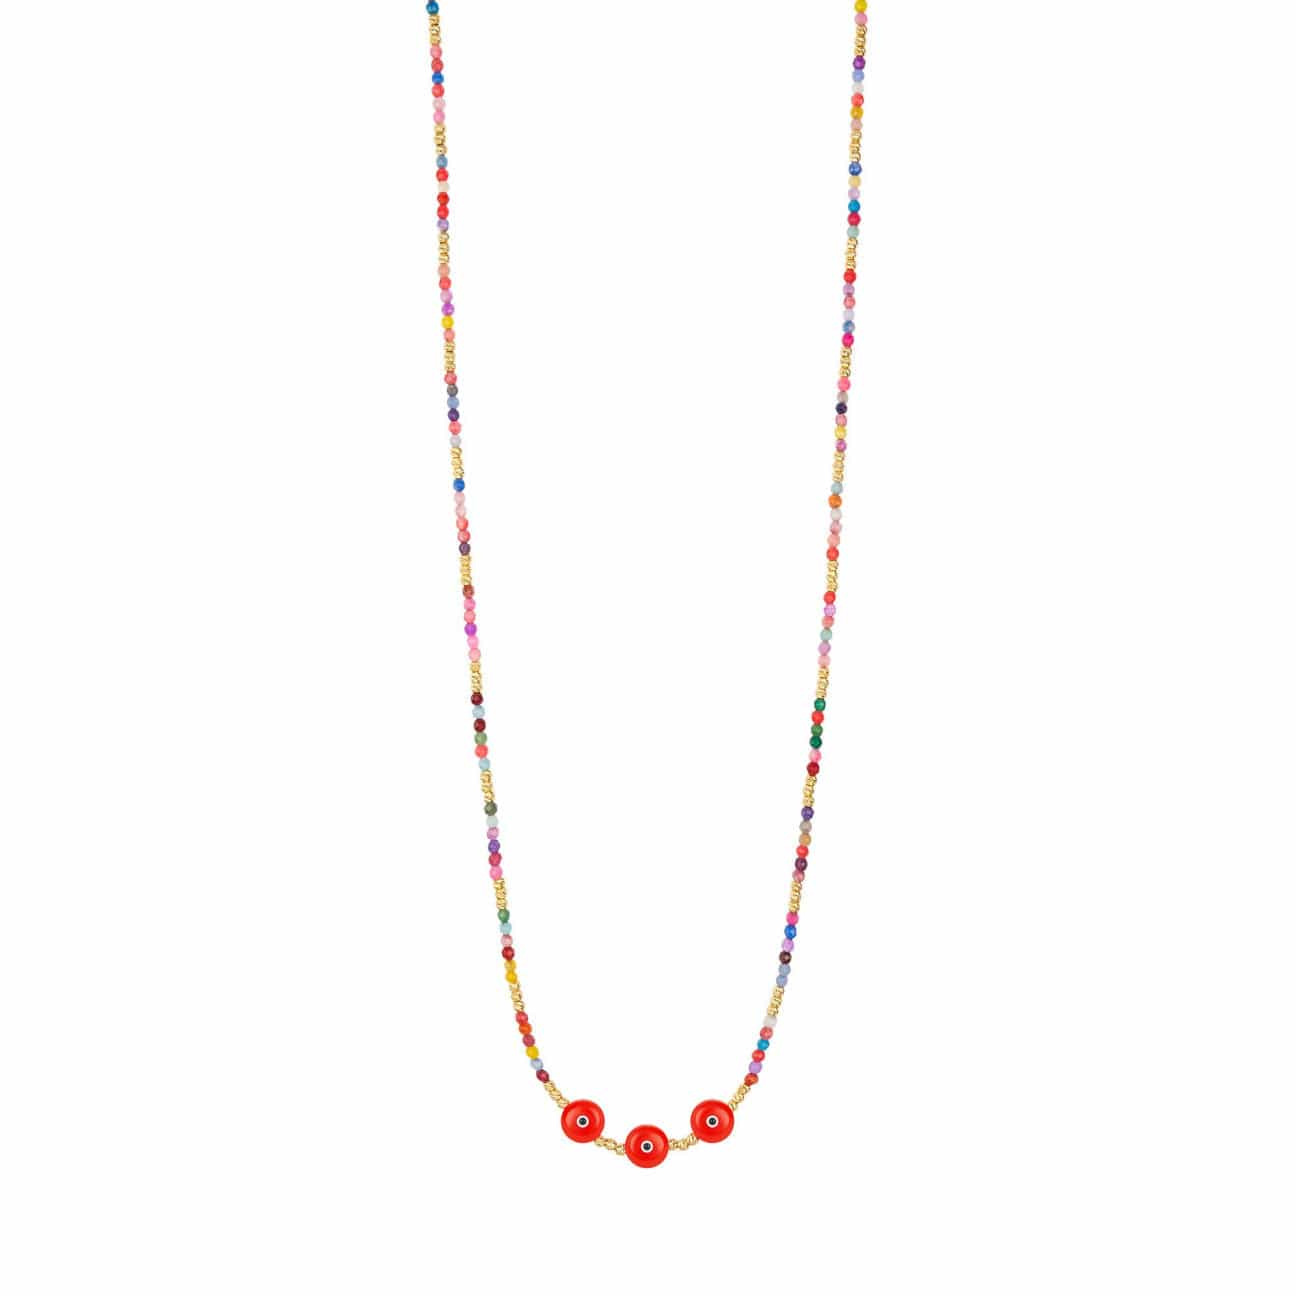 Long Colored Bead Necklace with 3 Majestic Evil Eyes - Coral - Golden Tangerine